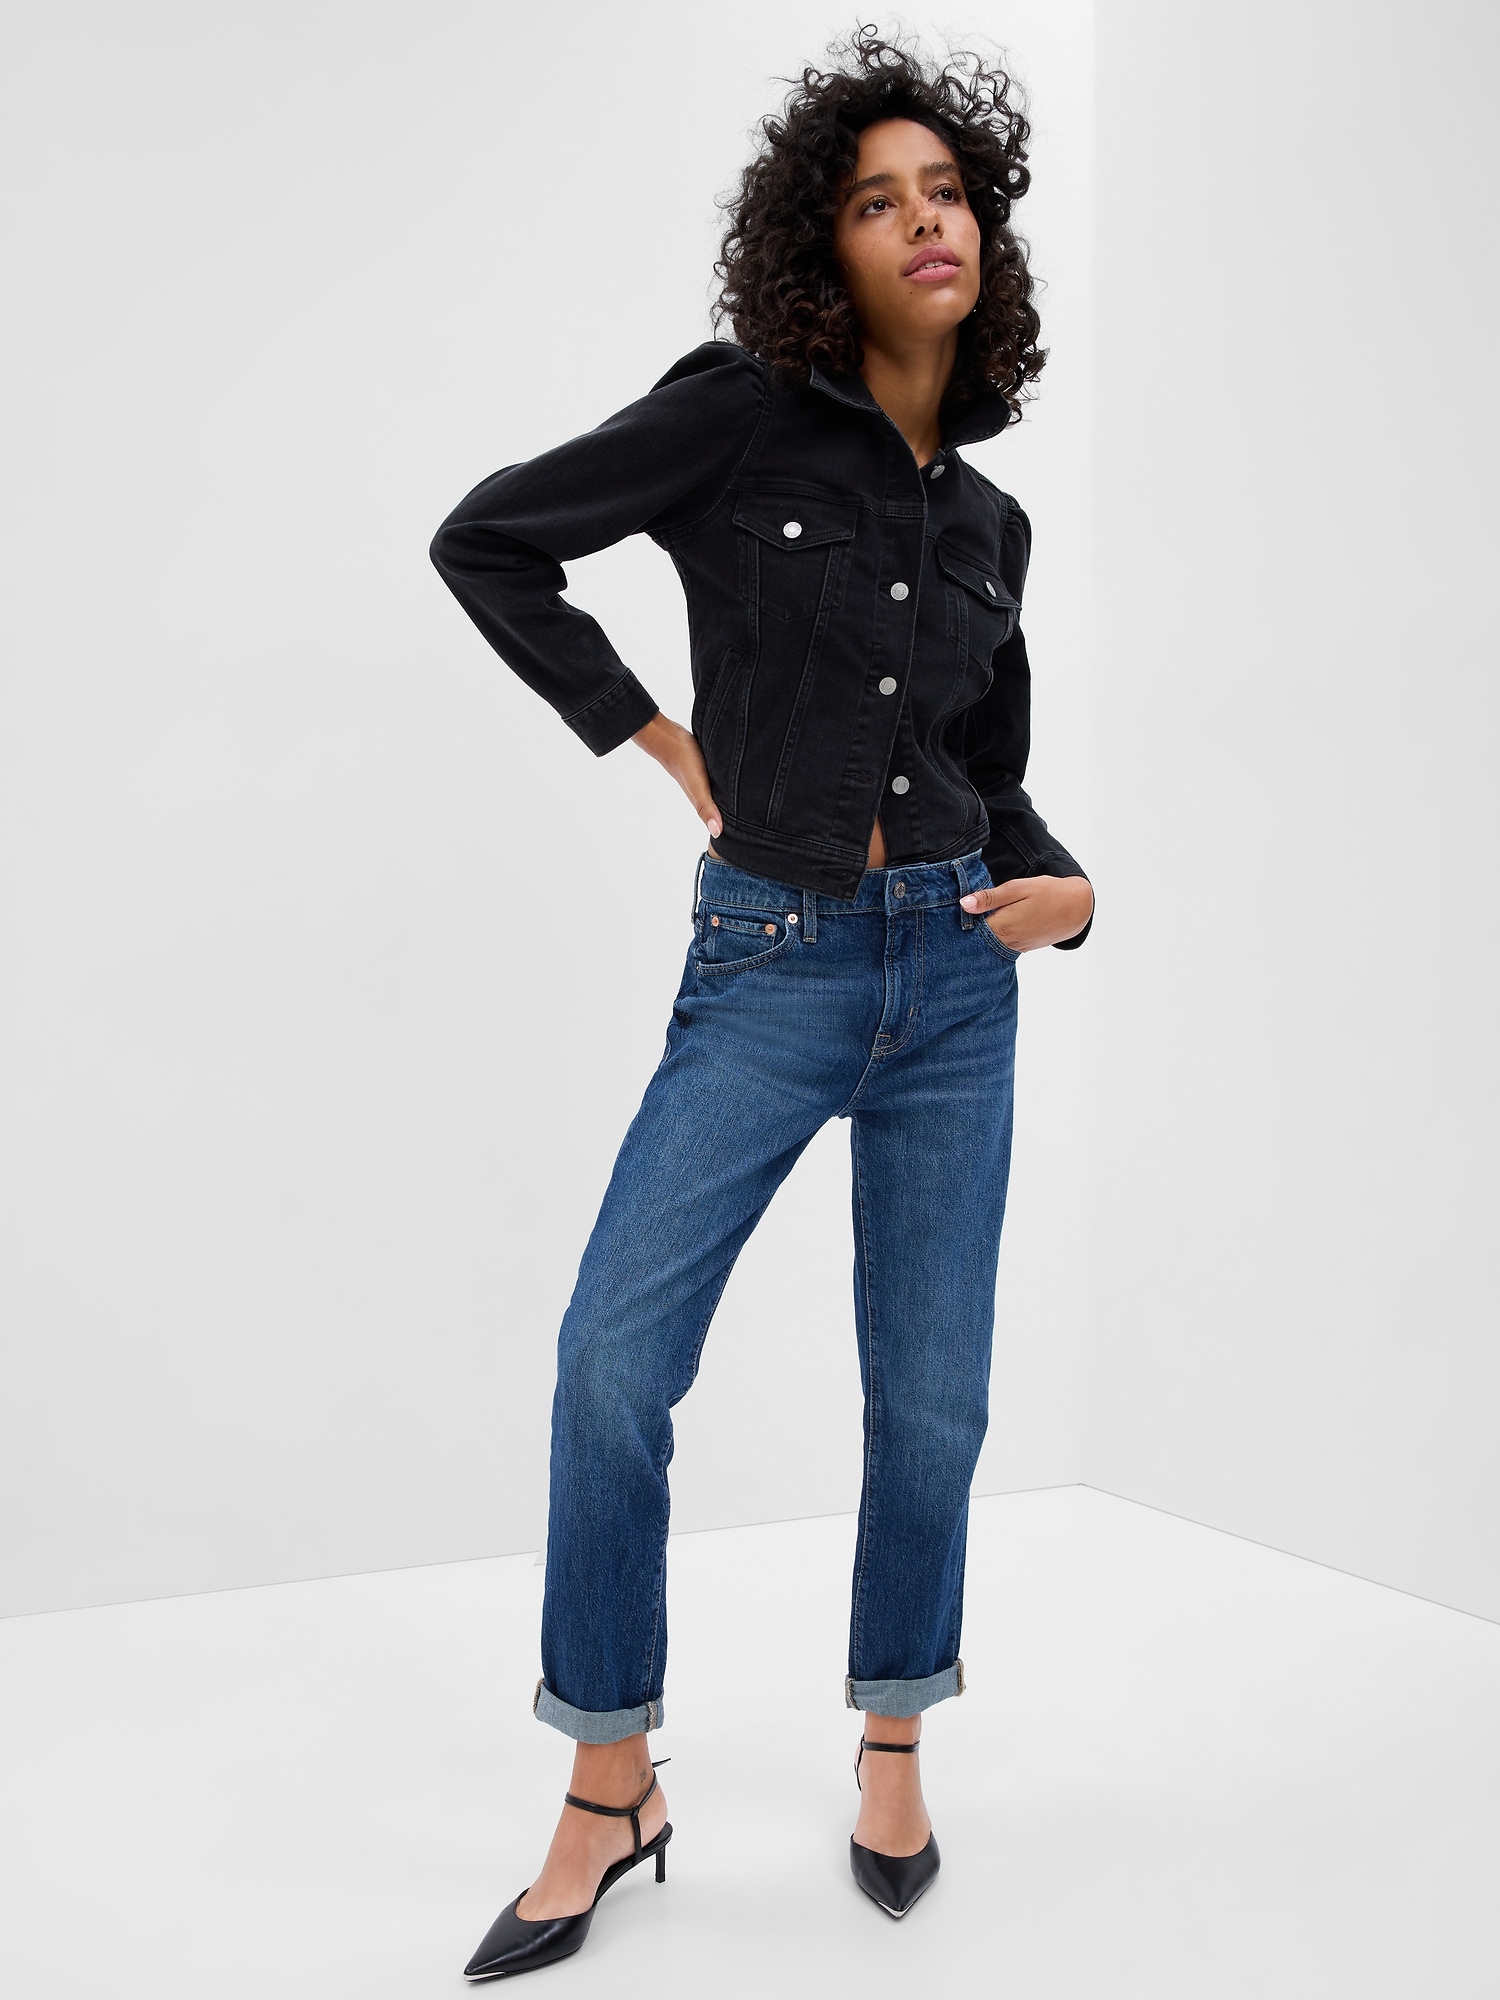 How to Style High cuff Jeans - My name is Lovely!